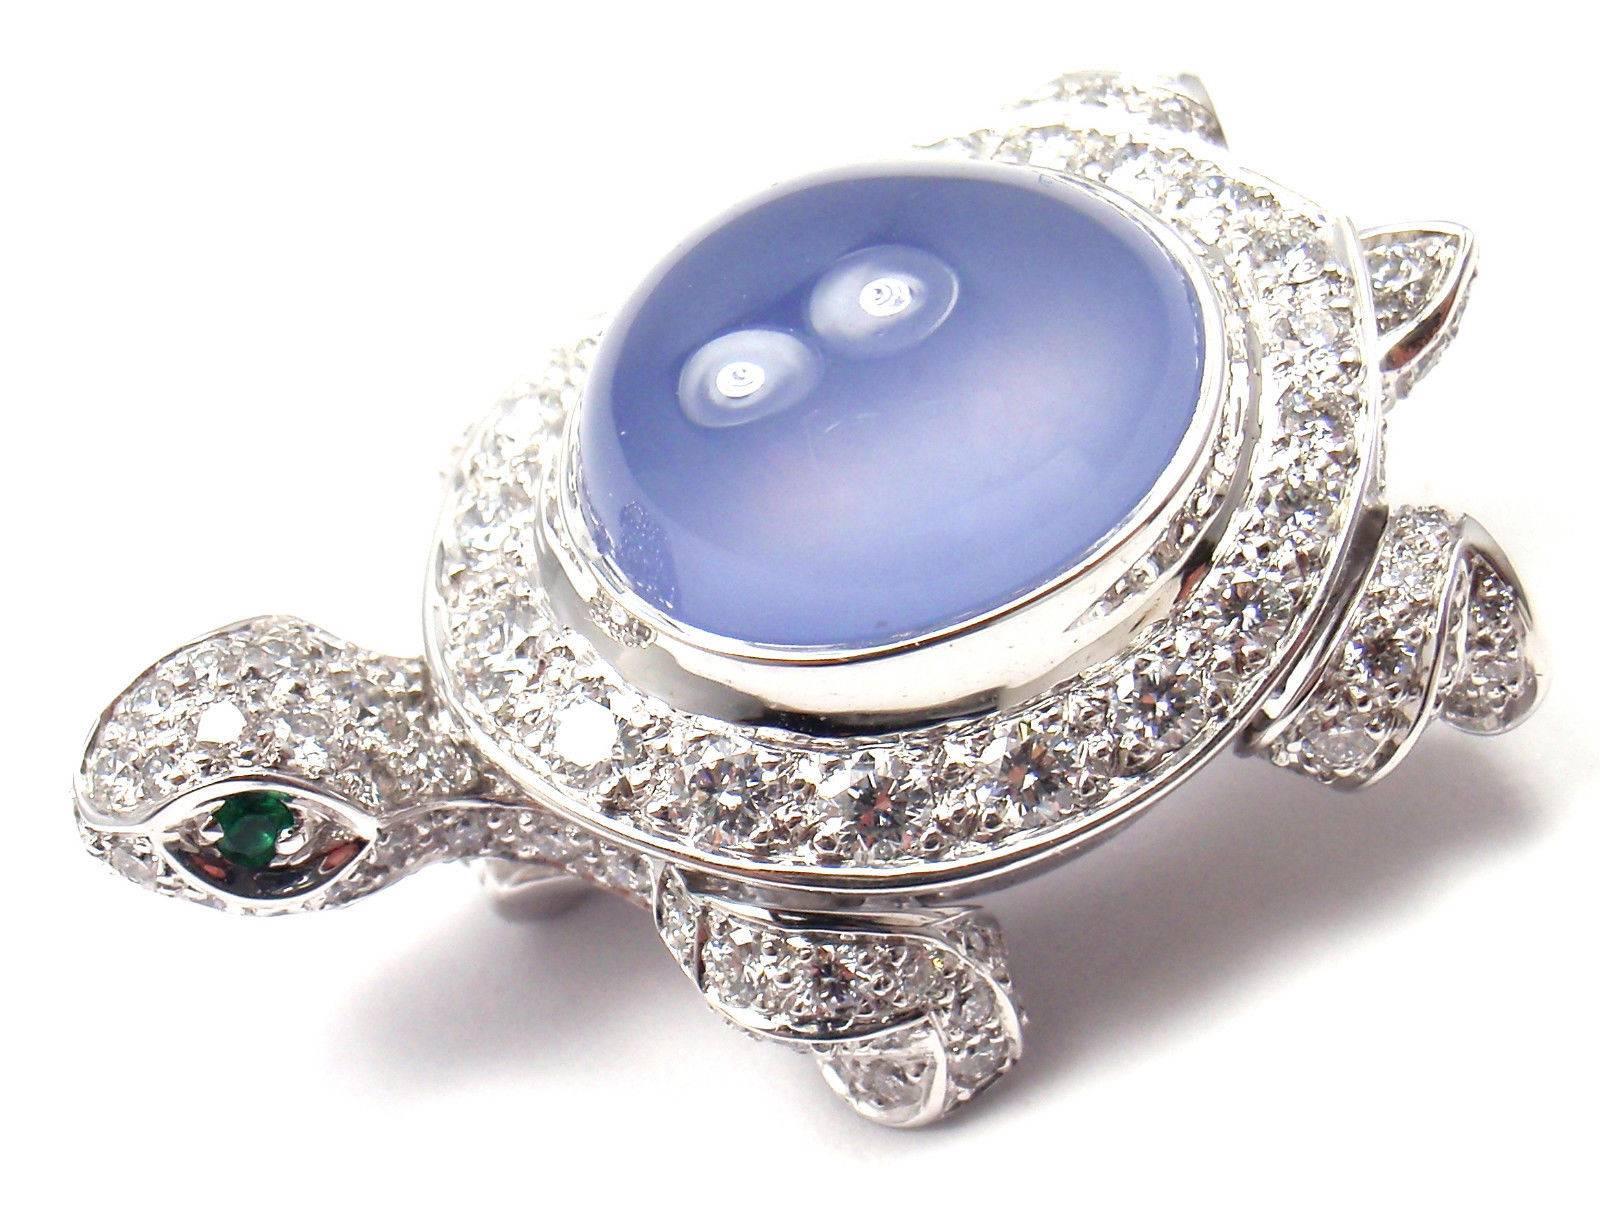 18k White Gold Diamond, Chalcedony and Emerald Turtle Pin Brooch by Cartier. This brooch comes with an original Cartier box and a Cartier certificate. 
With 123 round brilliant cut diamonds VVS1 clarity, E color total weight approx. 3ct
1 large